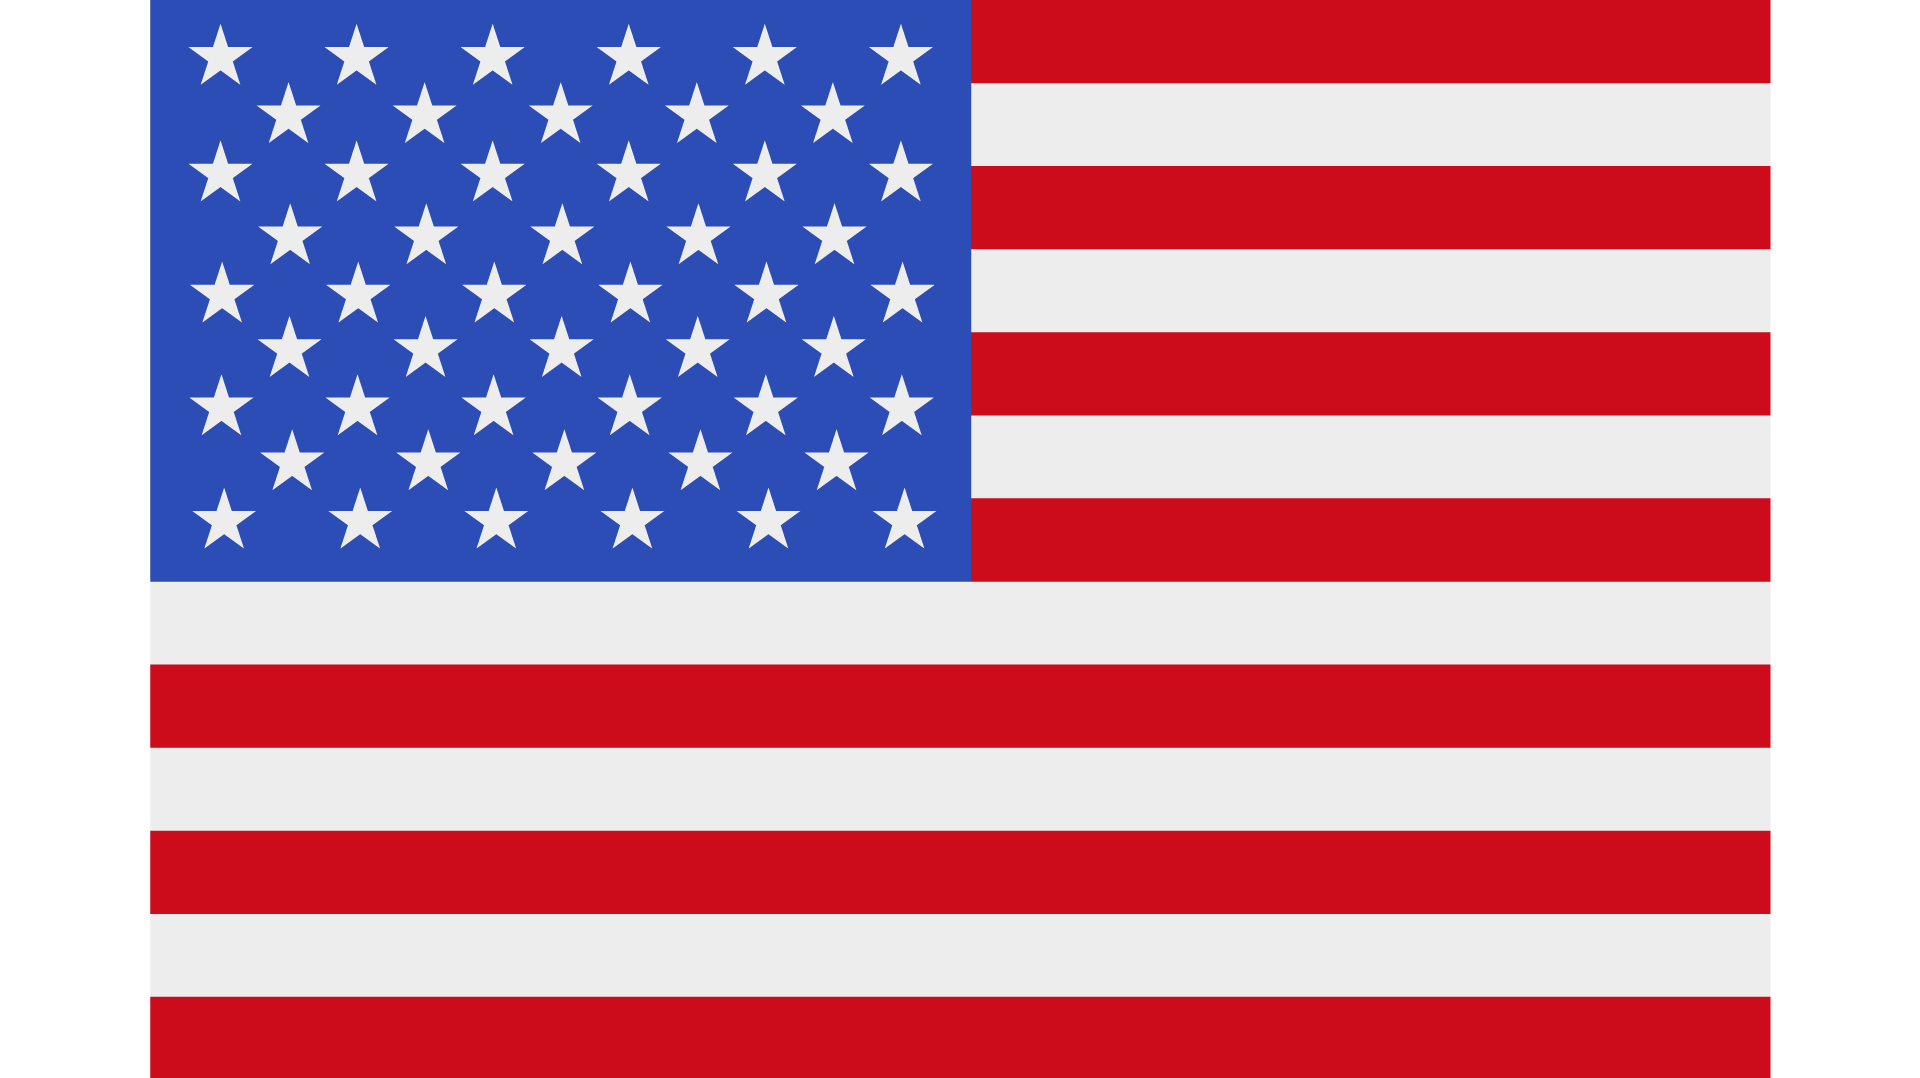 The flag of the United States of America in with red and white stripes. In the top left corner is a blue rectangle with white stars.